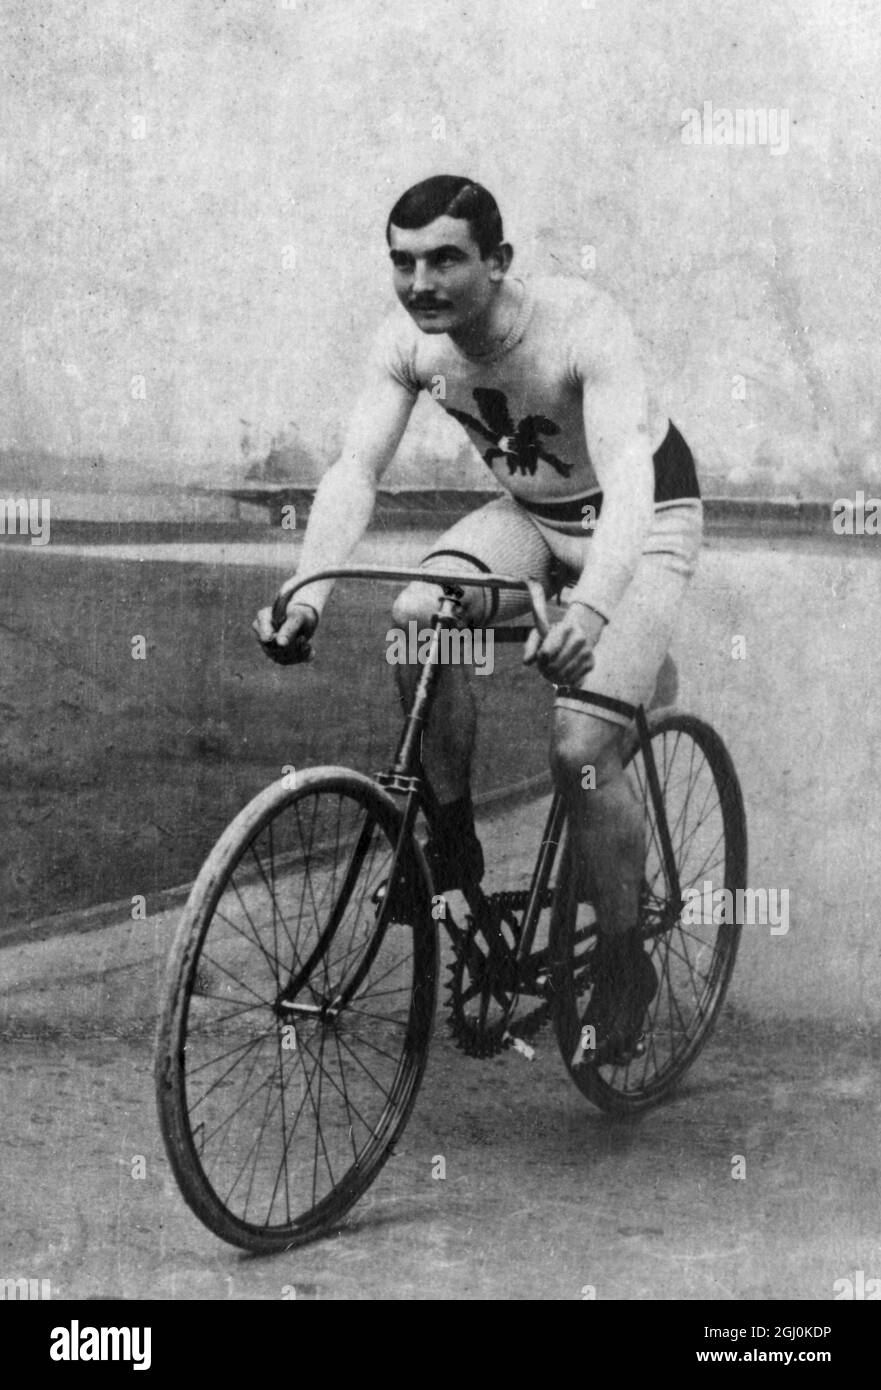 Arthur Linton (1872-96) - During the golden age of cycling Aberaman produced no less than four world class cyclists of which Arthur Linton of the three Linton brothers became World Champion. 1893 signed as a professional to ride a Gladiator cycle. 1894 defeated French champion. Alberman called him Champion Cyclist of the World. 1896 won the Bordeaux to Paris race. 1896 died of typhoid fever. ©TopFoto Stock Photo